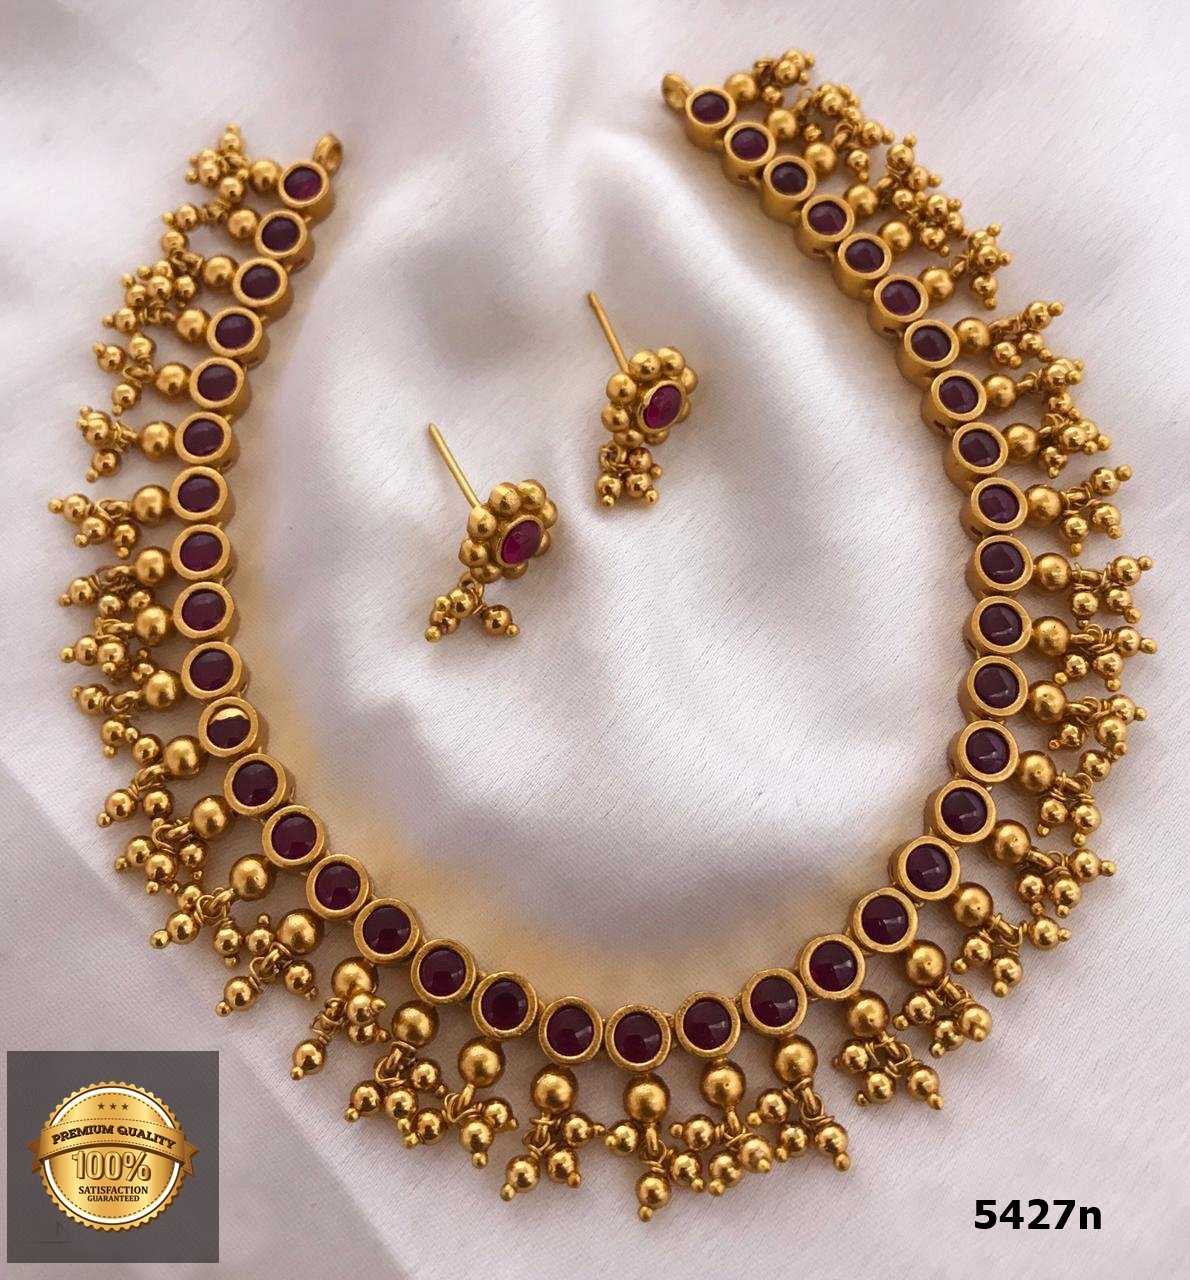 Premium Quality Micro Gold finish Necklace set with Ruby Red AD Stones 5427N